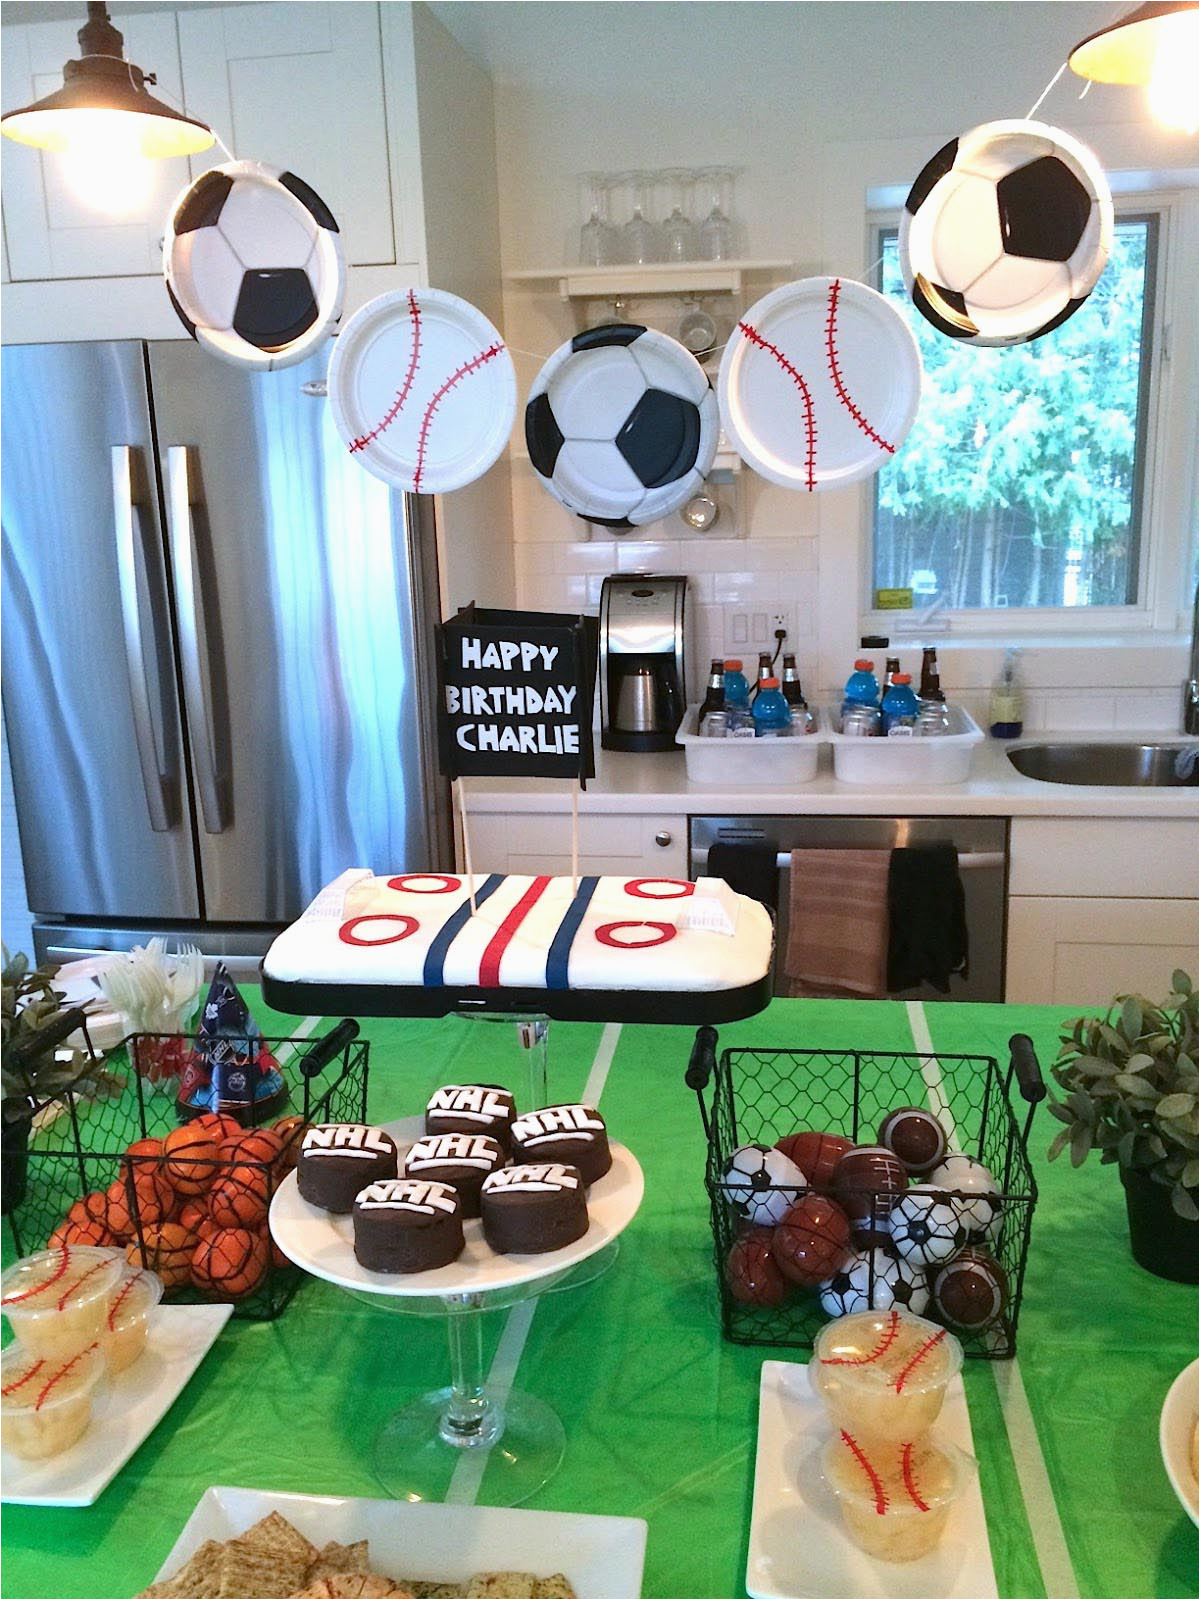 Sports themed Birthday Party Decorations Sports themed Birthday Parties Home Party Ideas